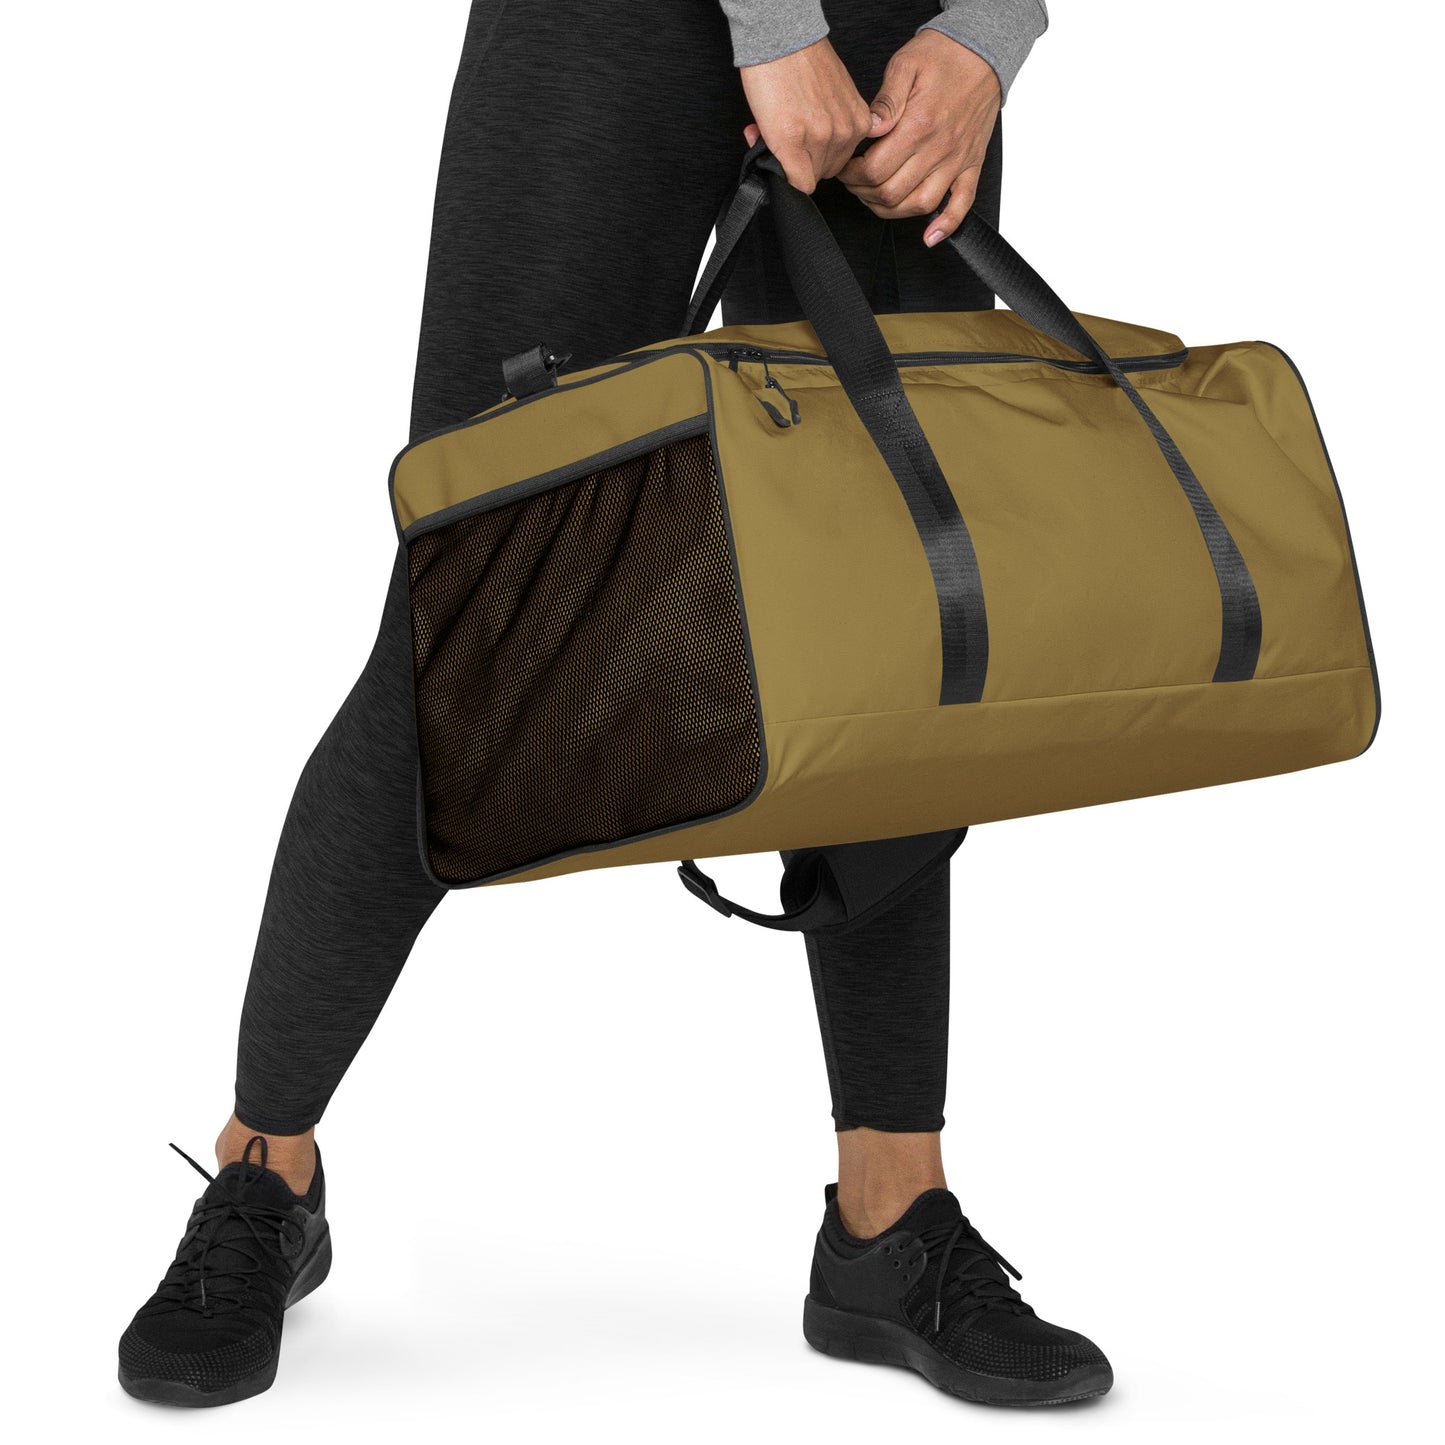 Goldie - Sustainably Made Duffle Bag